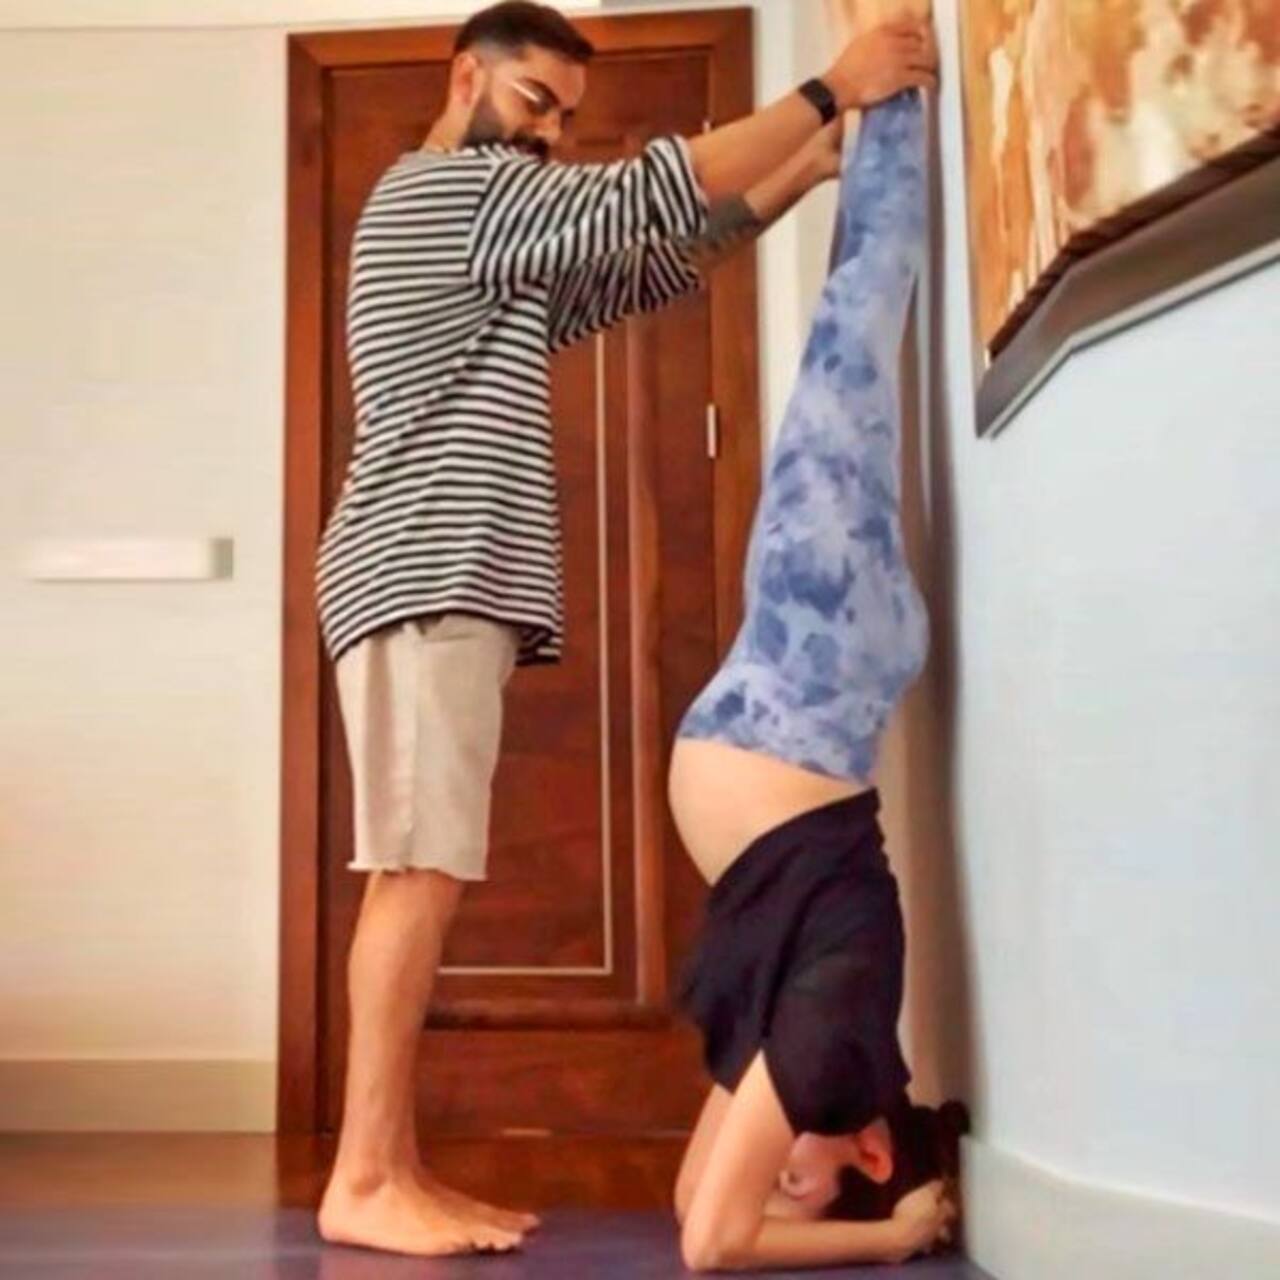 Pregnant Anushka Sharma performs headstand with hubby Virat Kohli’s support – see pic